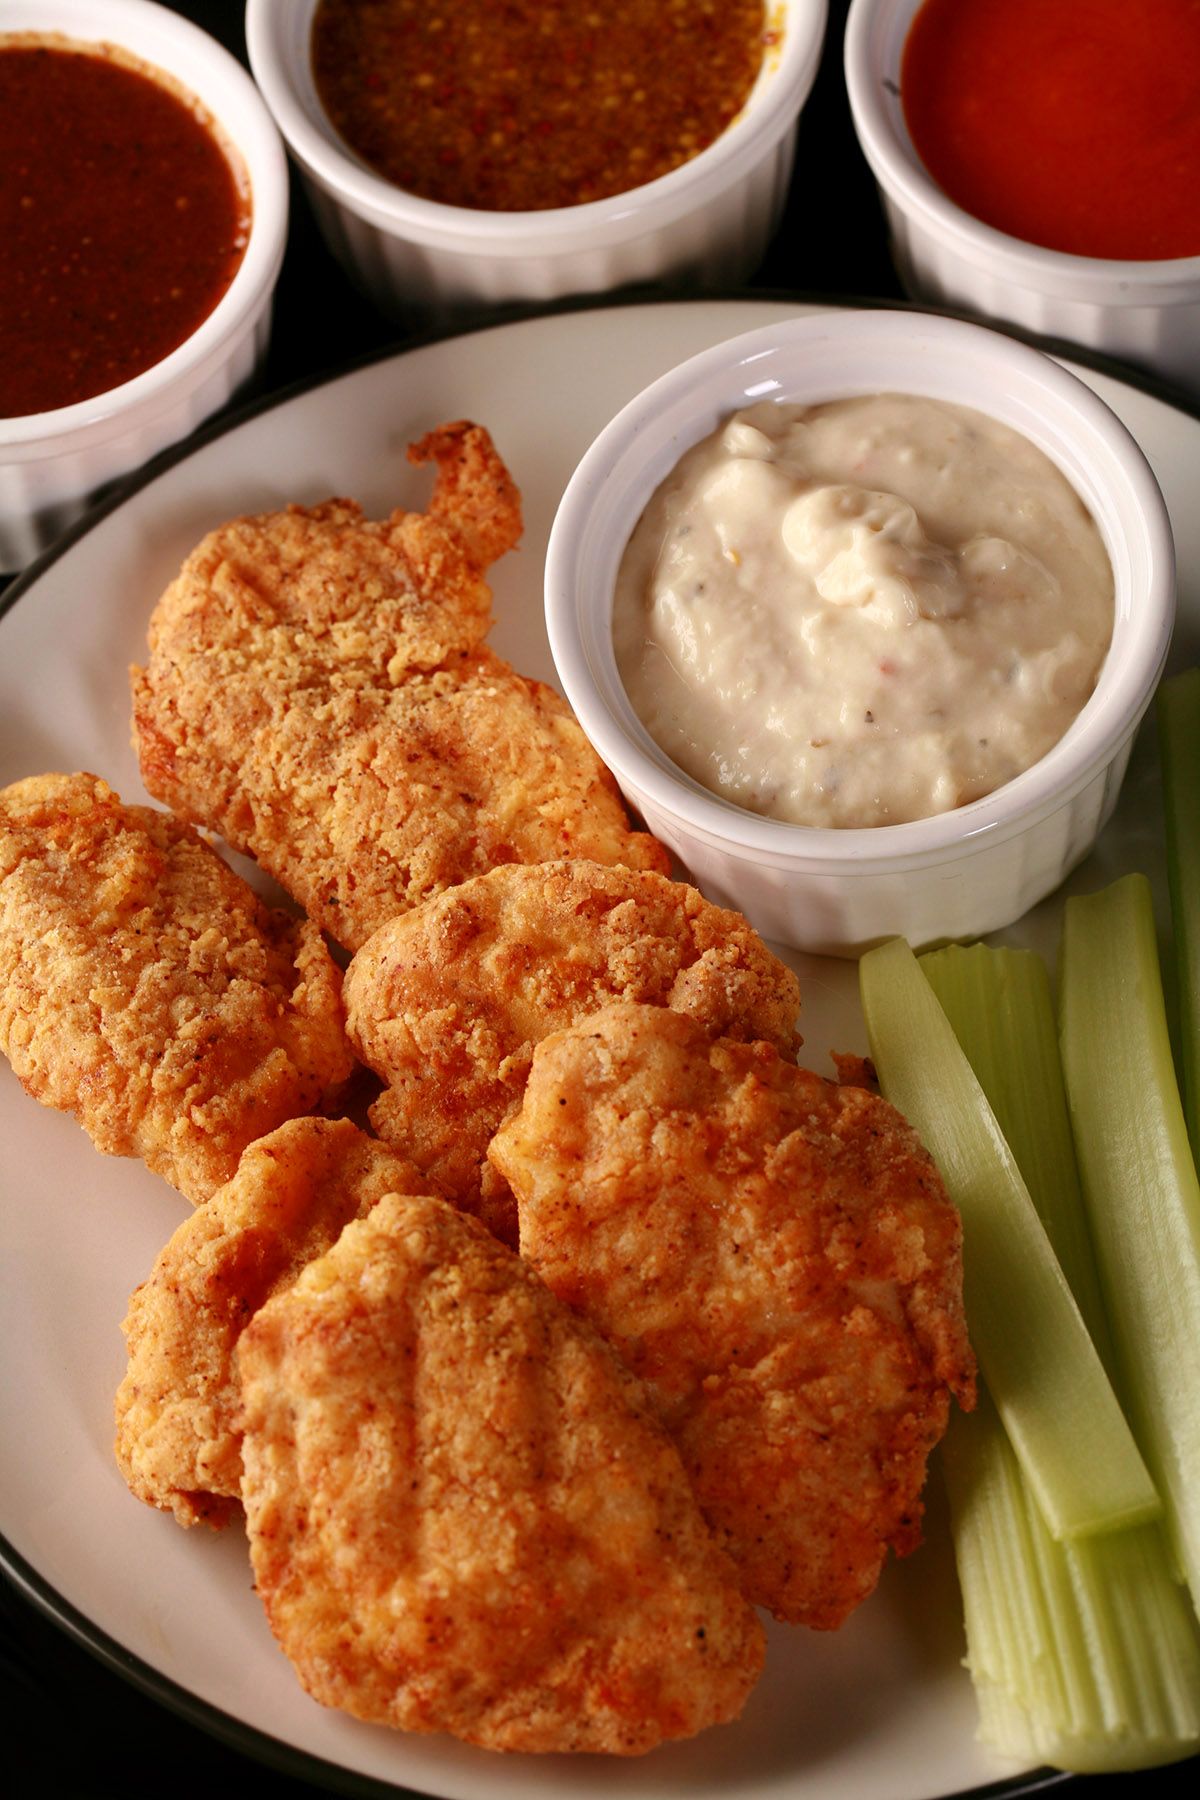 A plate of air fried gluten-free chicken nuggets, celery, and dip.